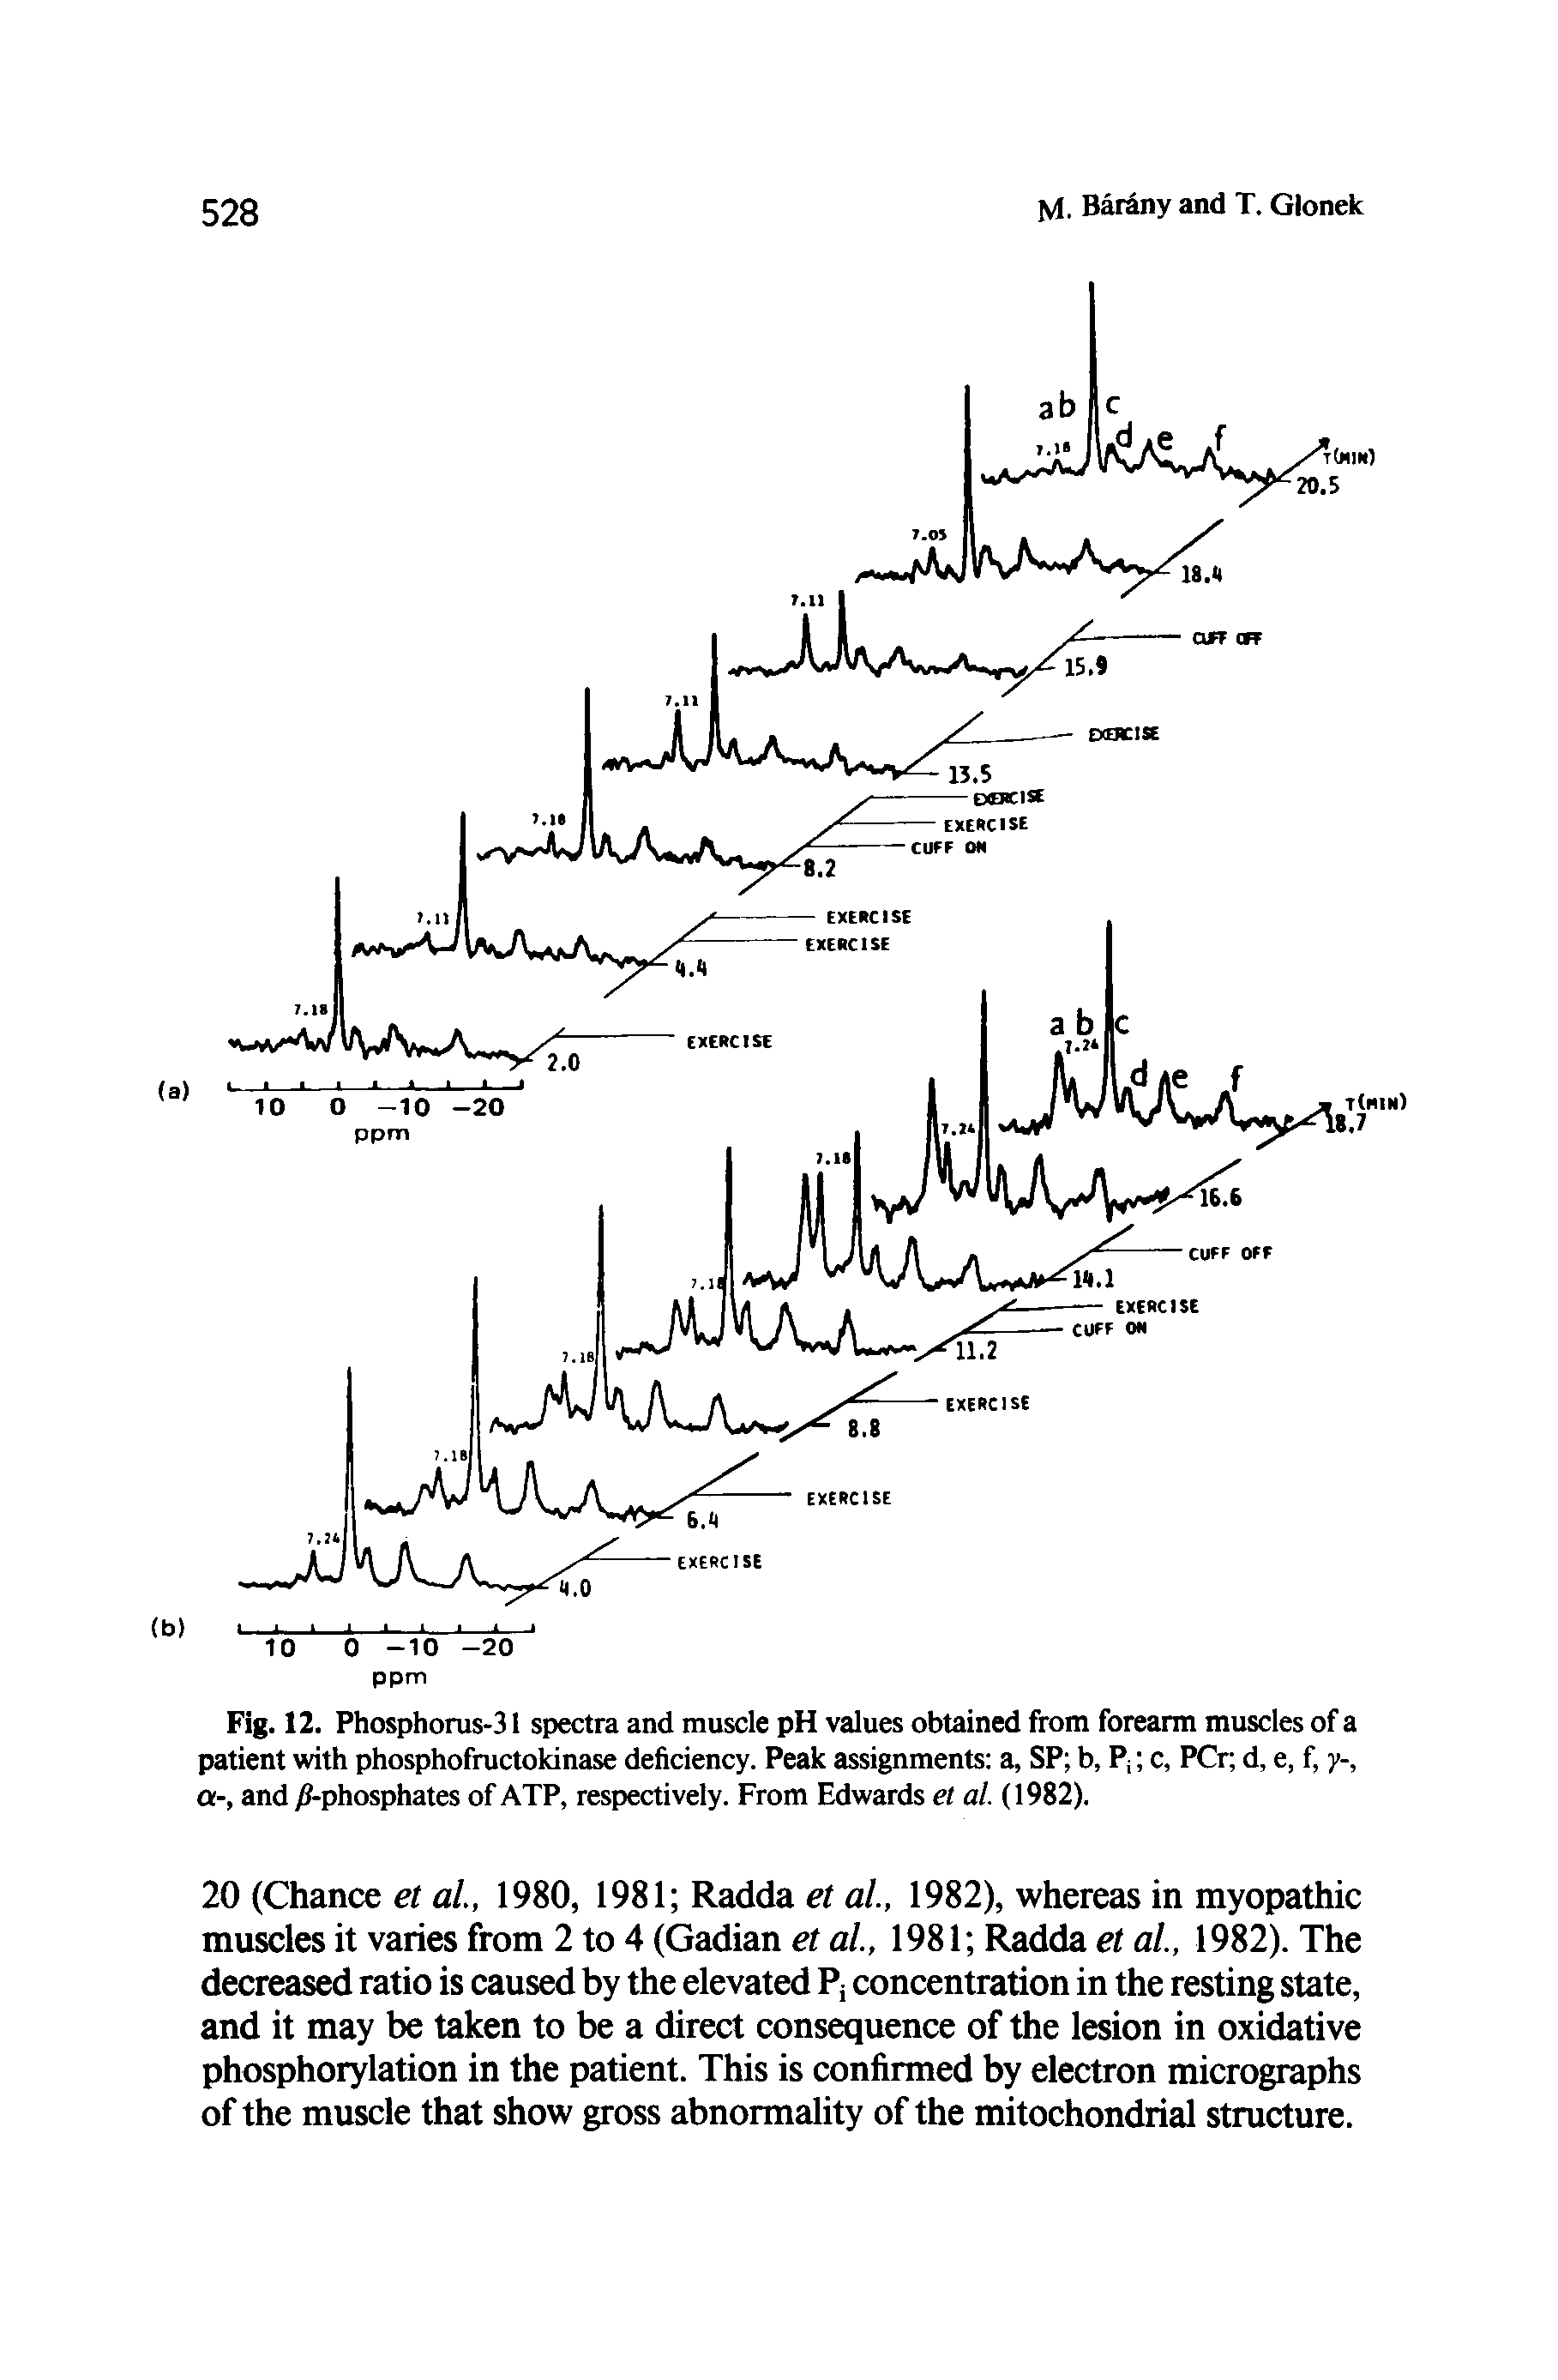 Fig. 12. Phosphorus-31 spectra and muscle pH values obtained from forearm muscles of a patient with phosphofructokinase deficiency. Peak assignments a, SP b, Pj c, PCr, d, e, f, y-, a-, and phosphates of ATP, respectively. From Edwards et al. (1982).